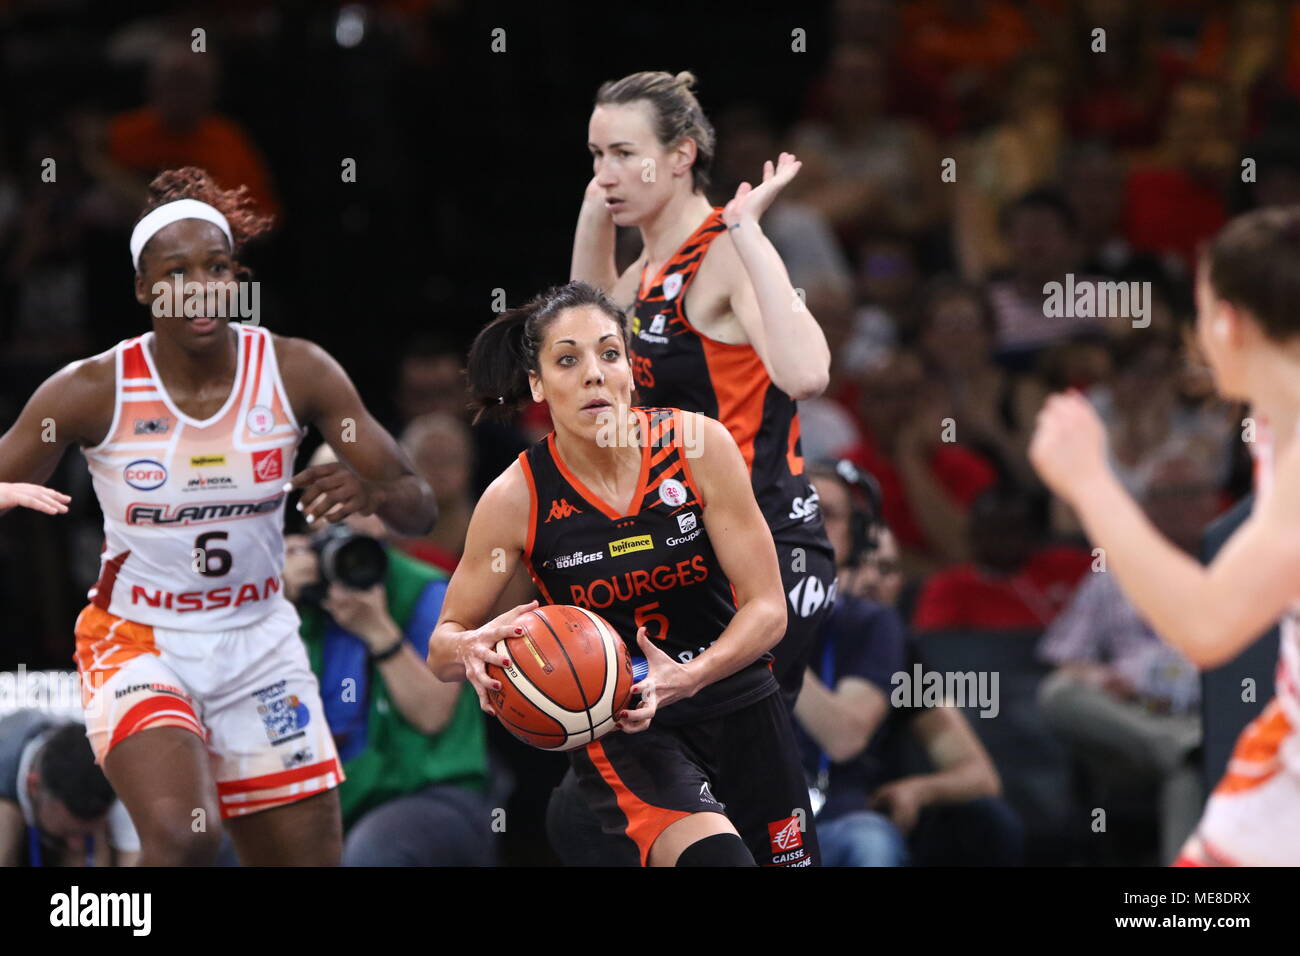 Cristina Ouvina in action during the France Women's Basketball Cup between Tango  Bourges basket and Flammes Carolo Basket Ardennes in AccorHotel Arena of  Paris Stock Photo - Alamy